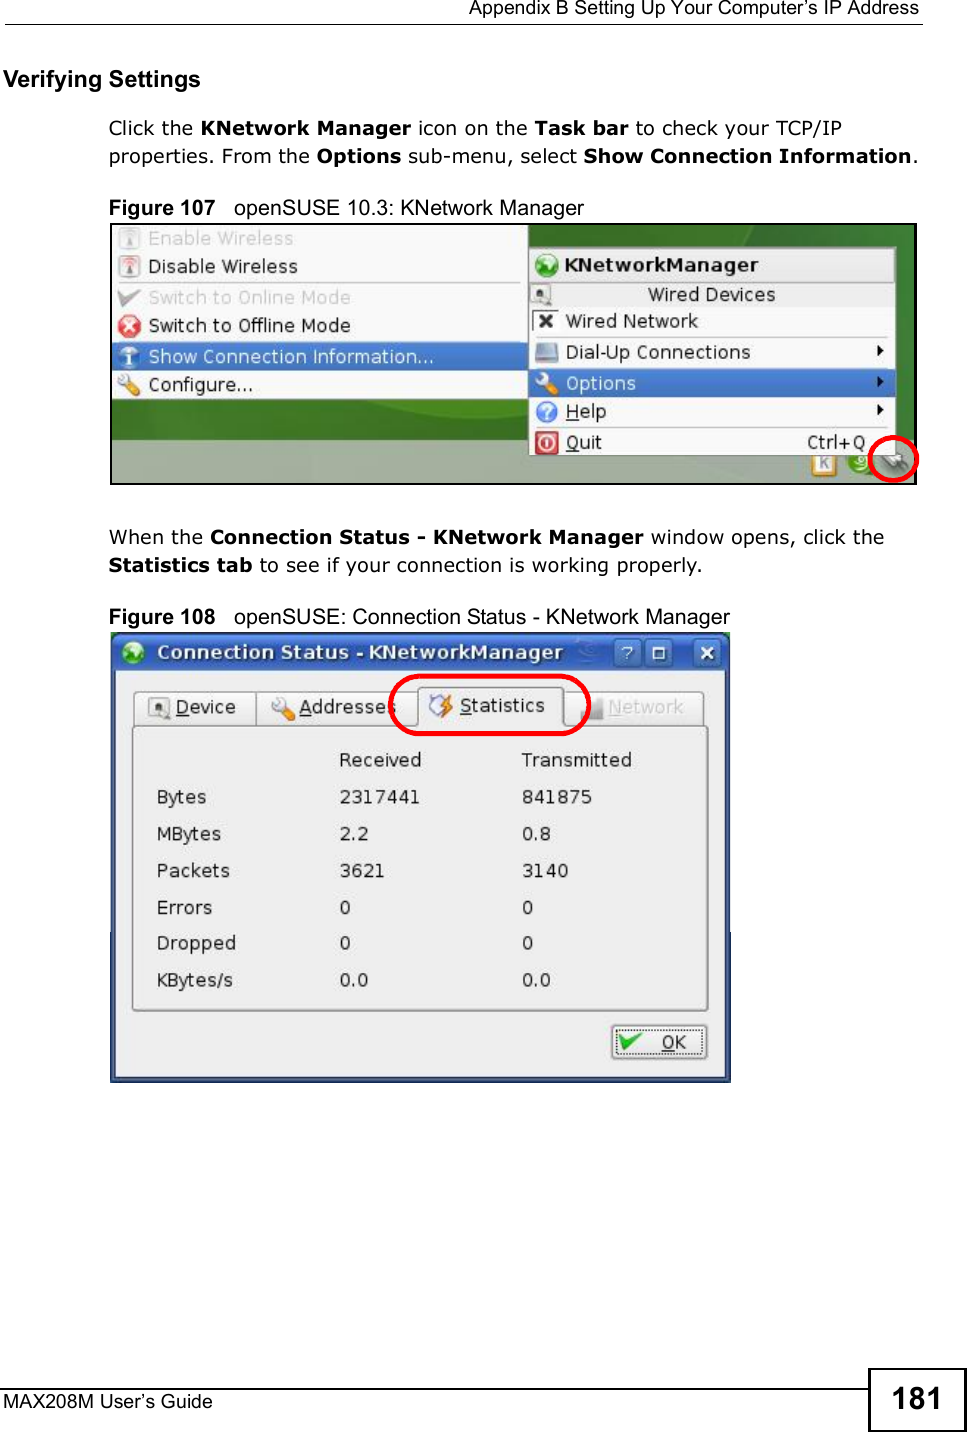  Appendix BSetting Up Your Computer s IP AddressMAX208M User s Guide 181Verifying SettingsClick the KNetwork Manager icon on the Task bar to check your TCP/IP properties. From the Options sub-menu, select Show Connection Information.Figure 107   openSUSE 10.3: KNetwork ManagerWhen the Connection Status - KNetwork Manager window opens, click the Statistics tab to see if your connection is working properly.Figure 108   openSUSE: Connection Status - KNetwork Manager